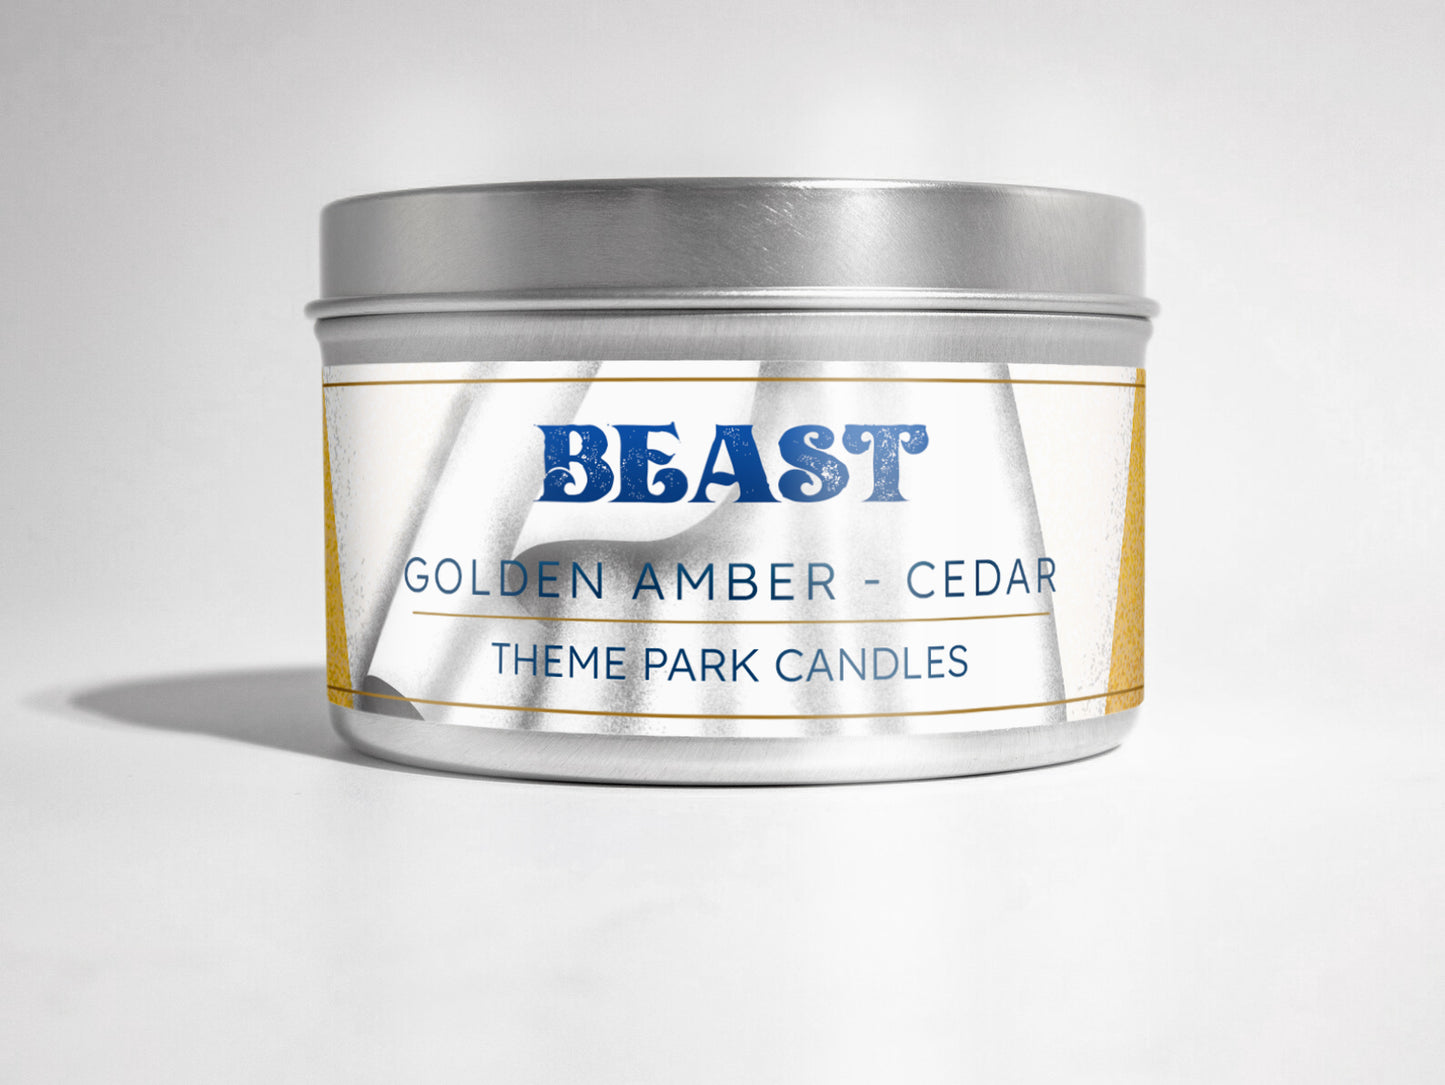 Beast Candle | Theme Park Candles | 6.5 oz Scented Soy Wax Blend Candle